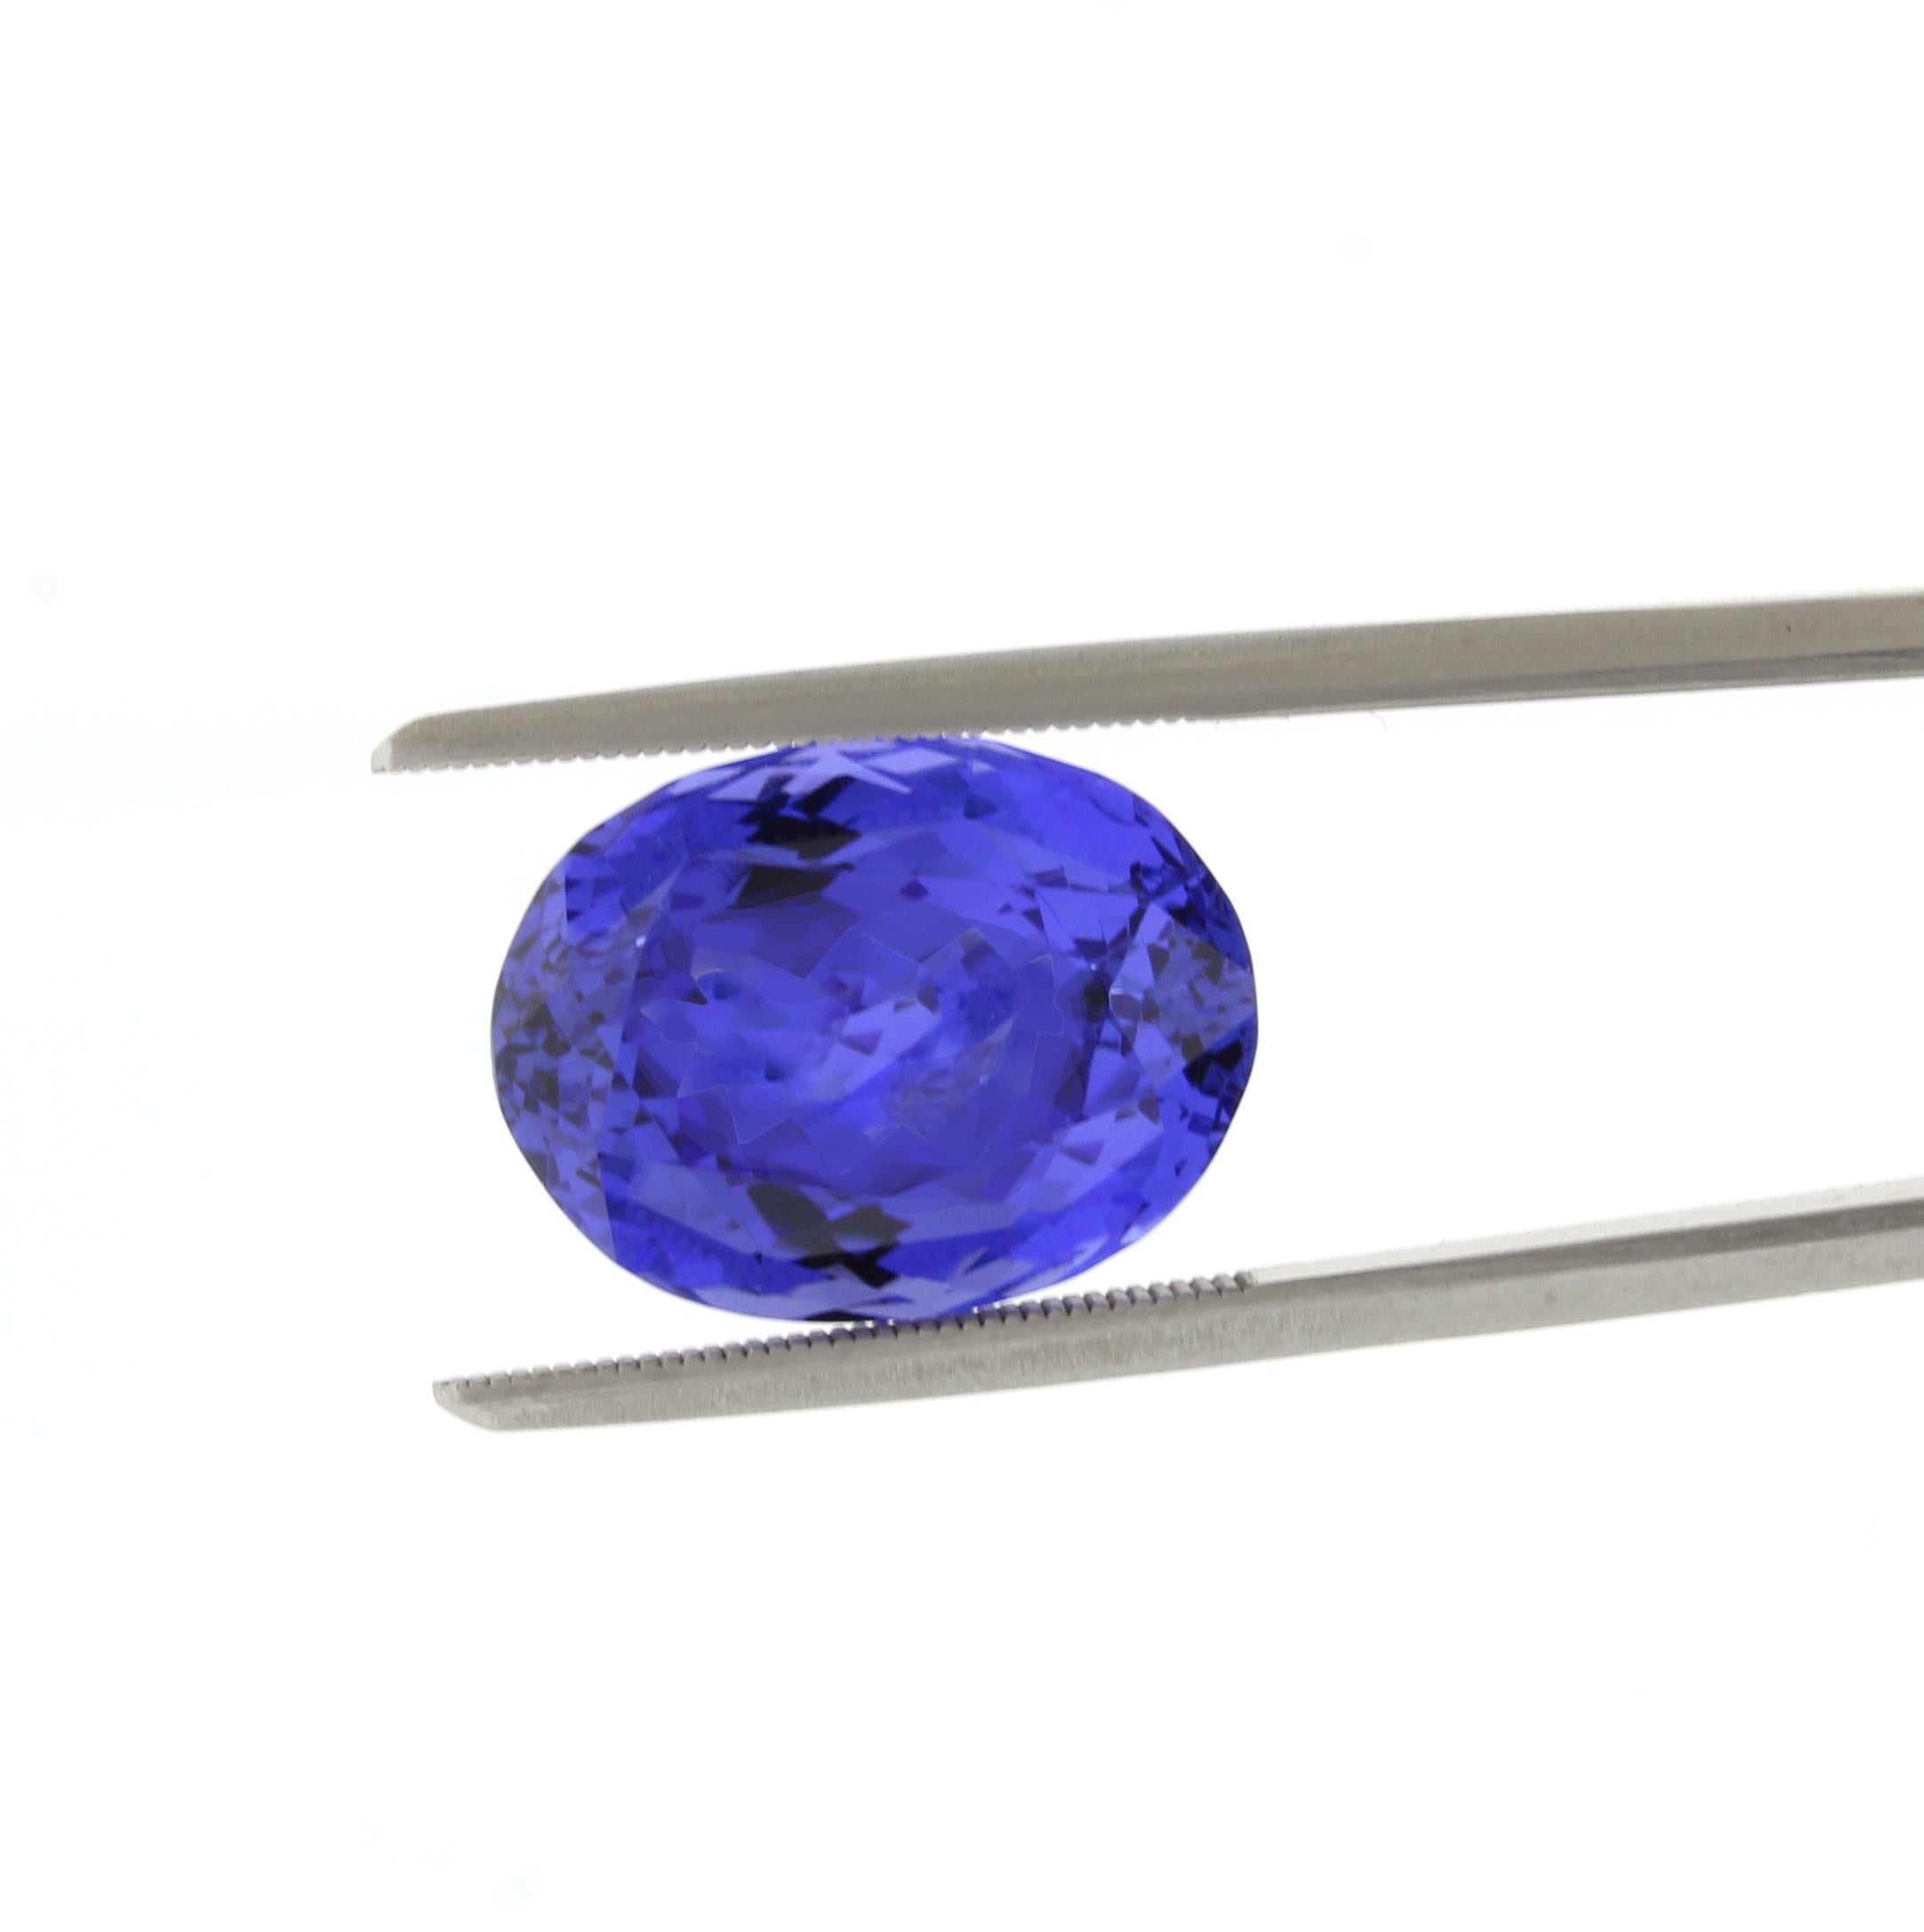 Oval Cut 8.86 GAL Certified Oval Tanzanite For Sale